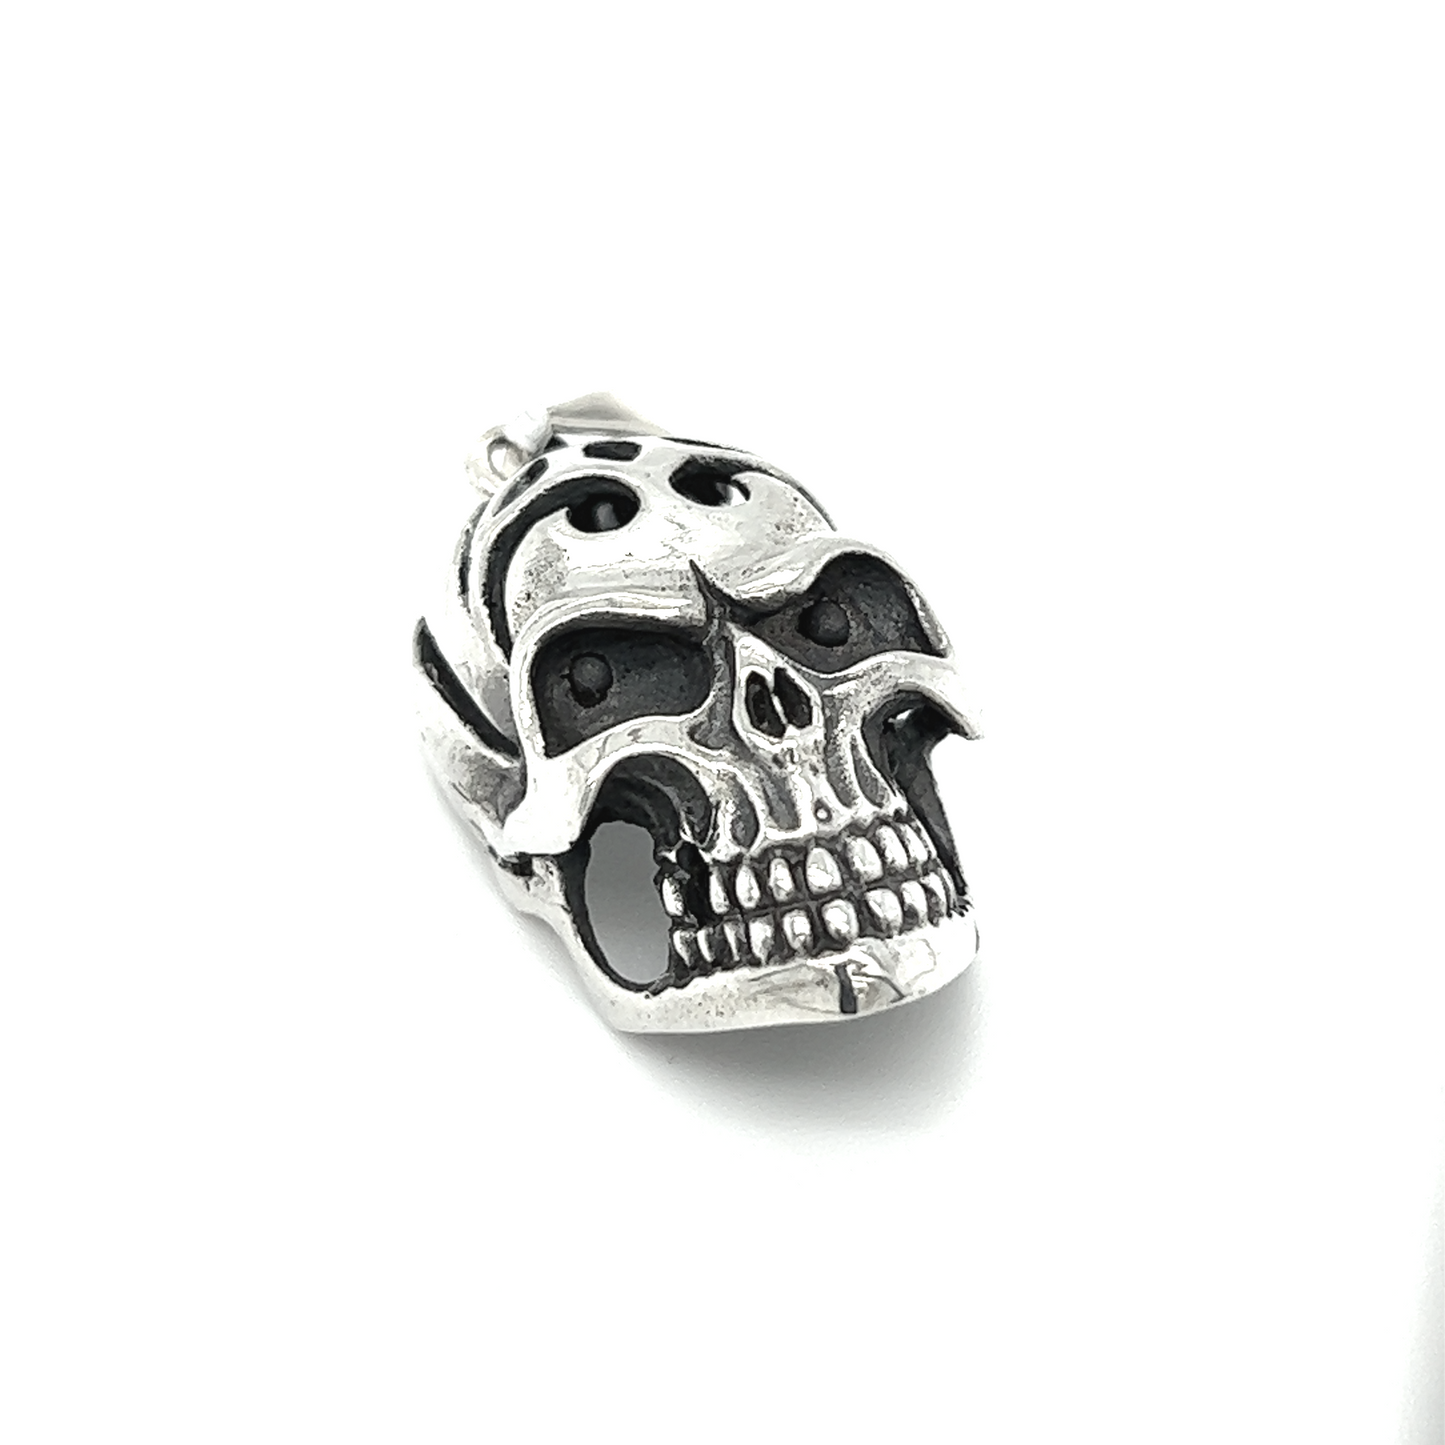 A distinctive Super Silver skull pendant with an oxidized finish on a white background.